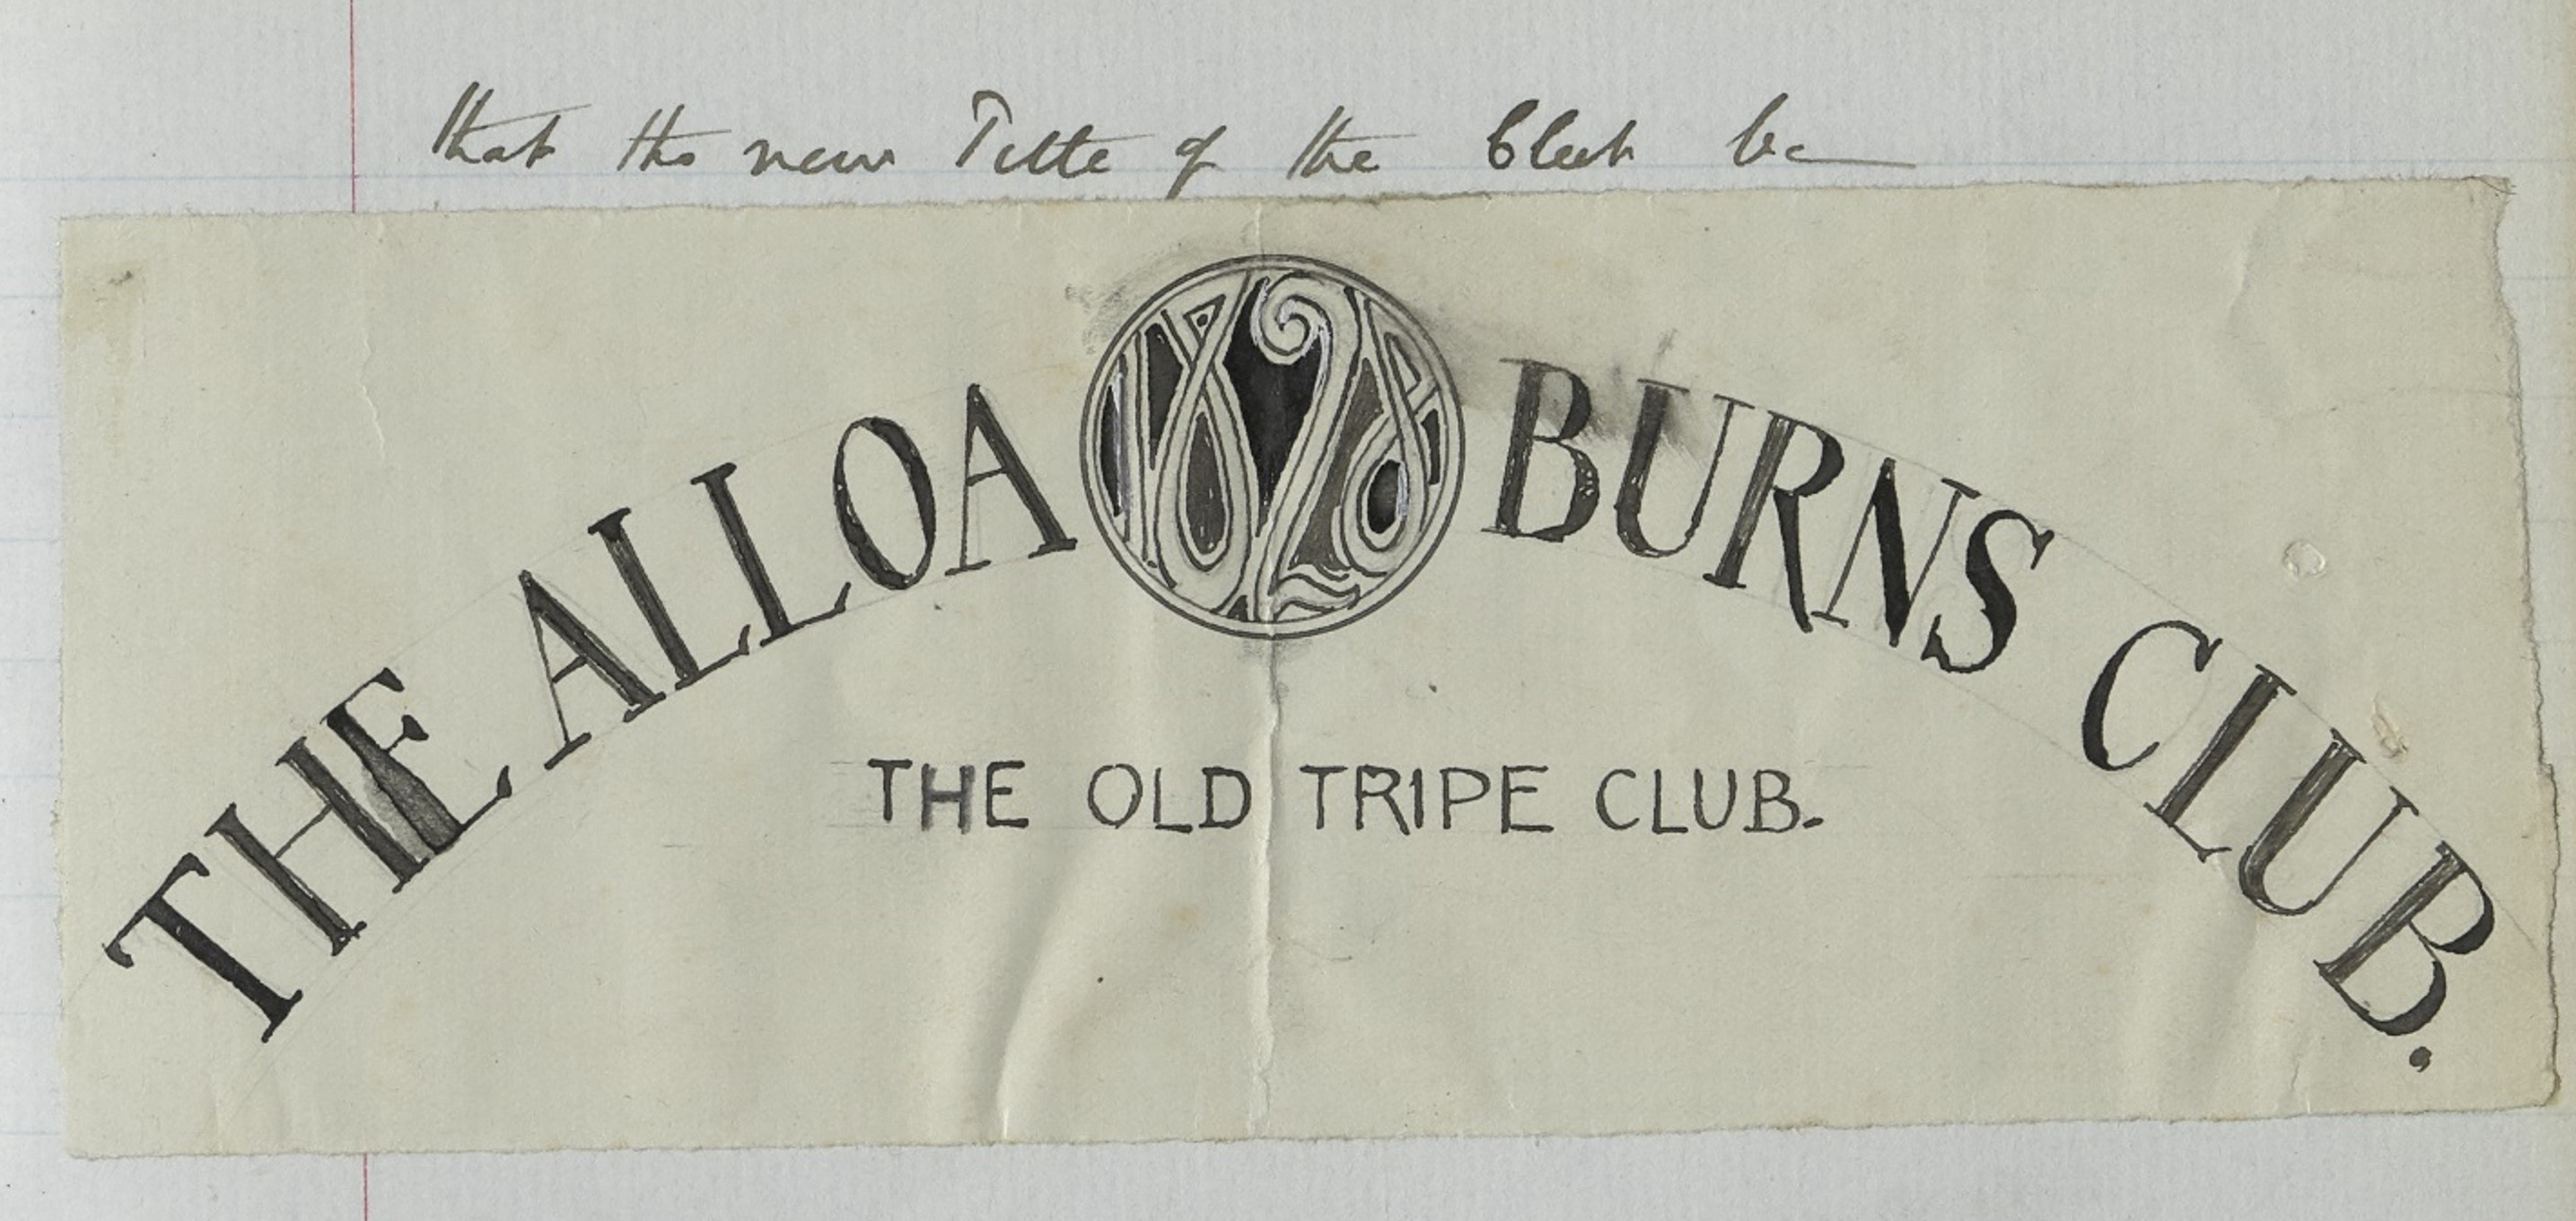 First image of the change of name from Tripe Club to Alloa Burns Club